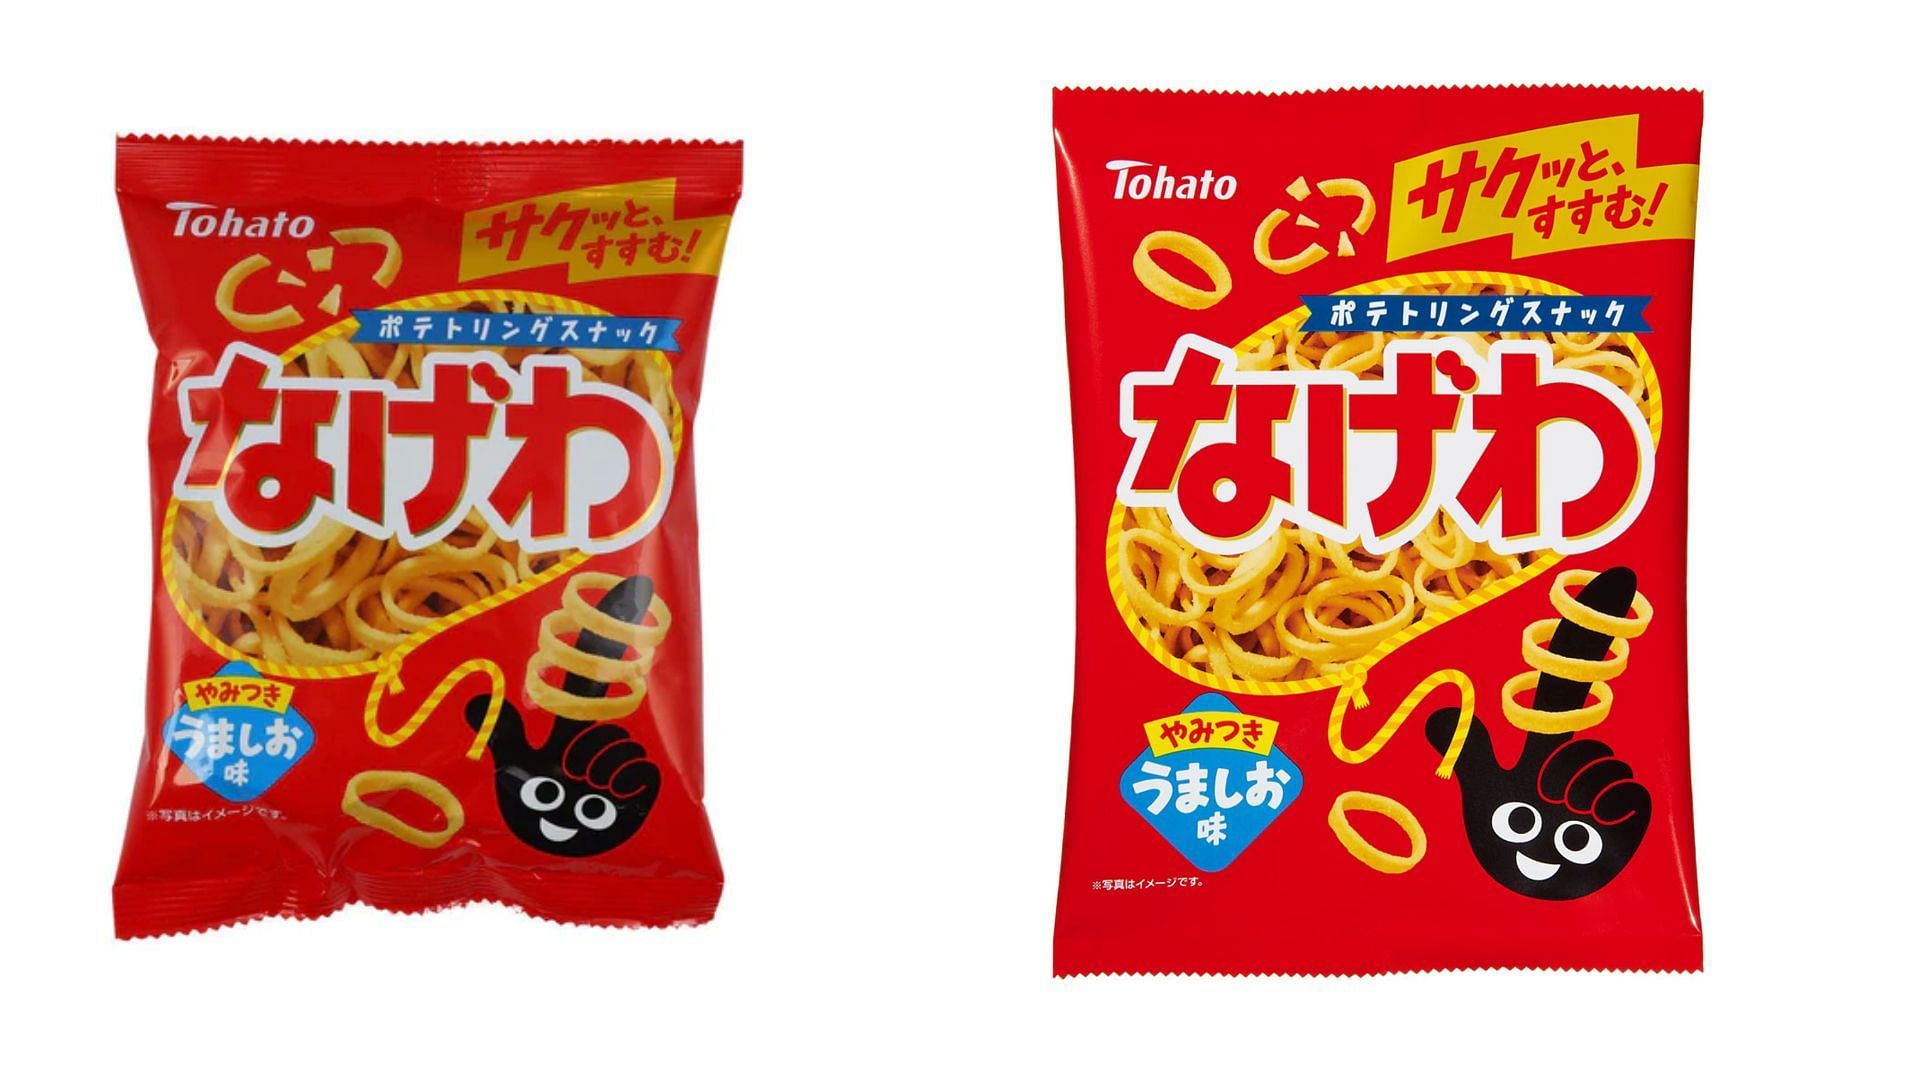 Recalled packets of the Tohato Nagewa Snack (Image via FDA)